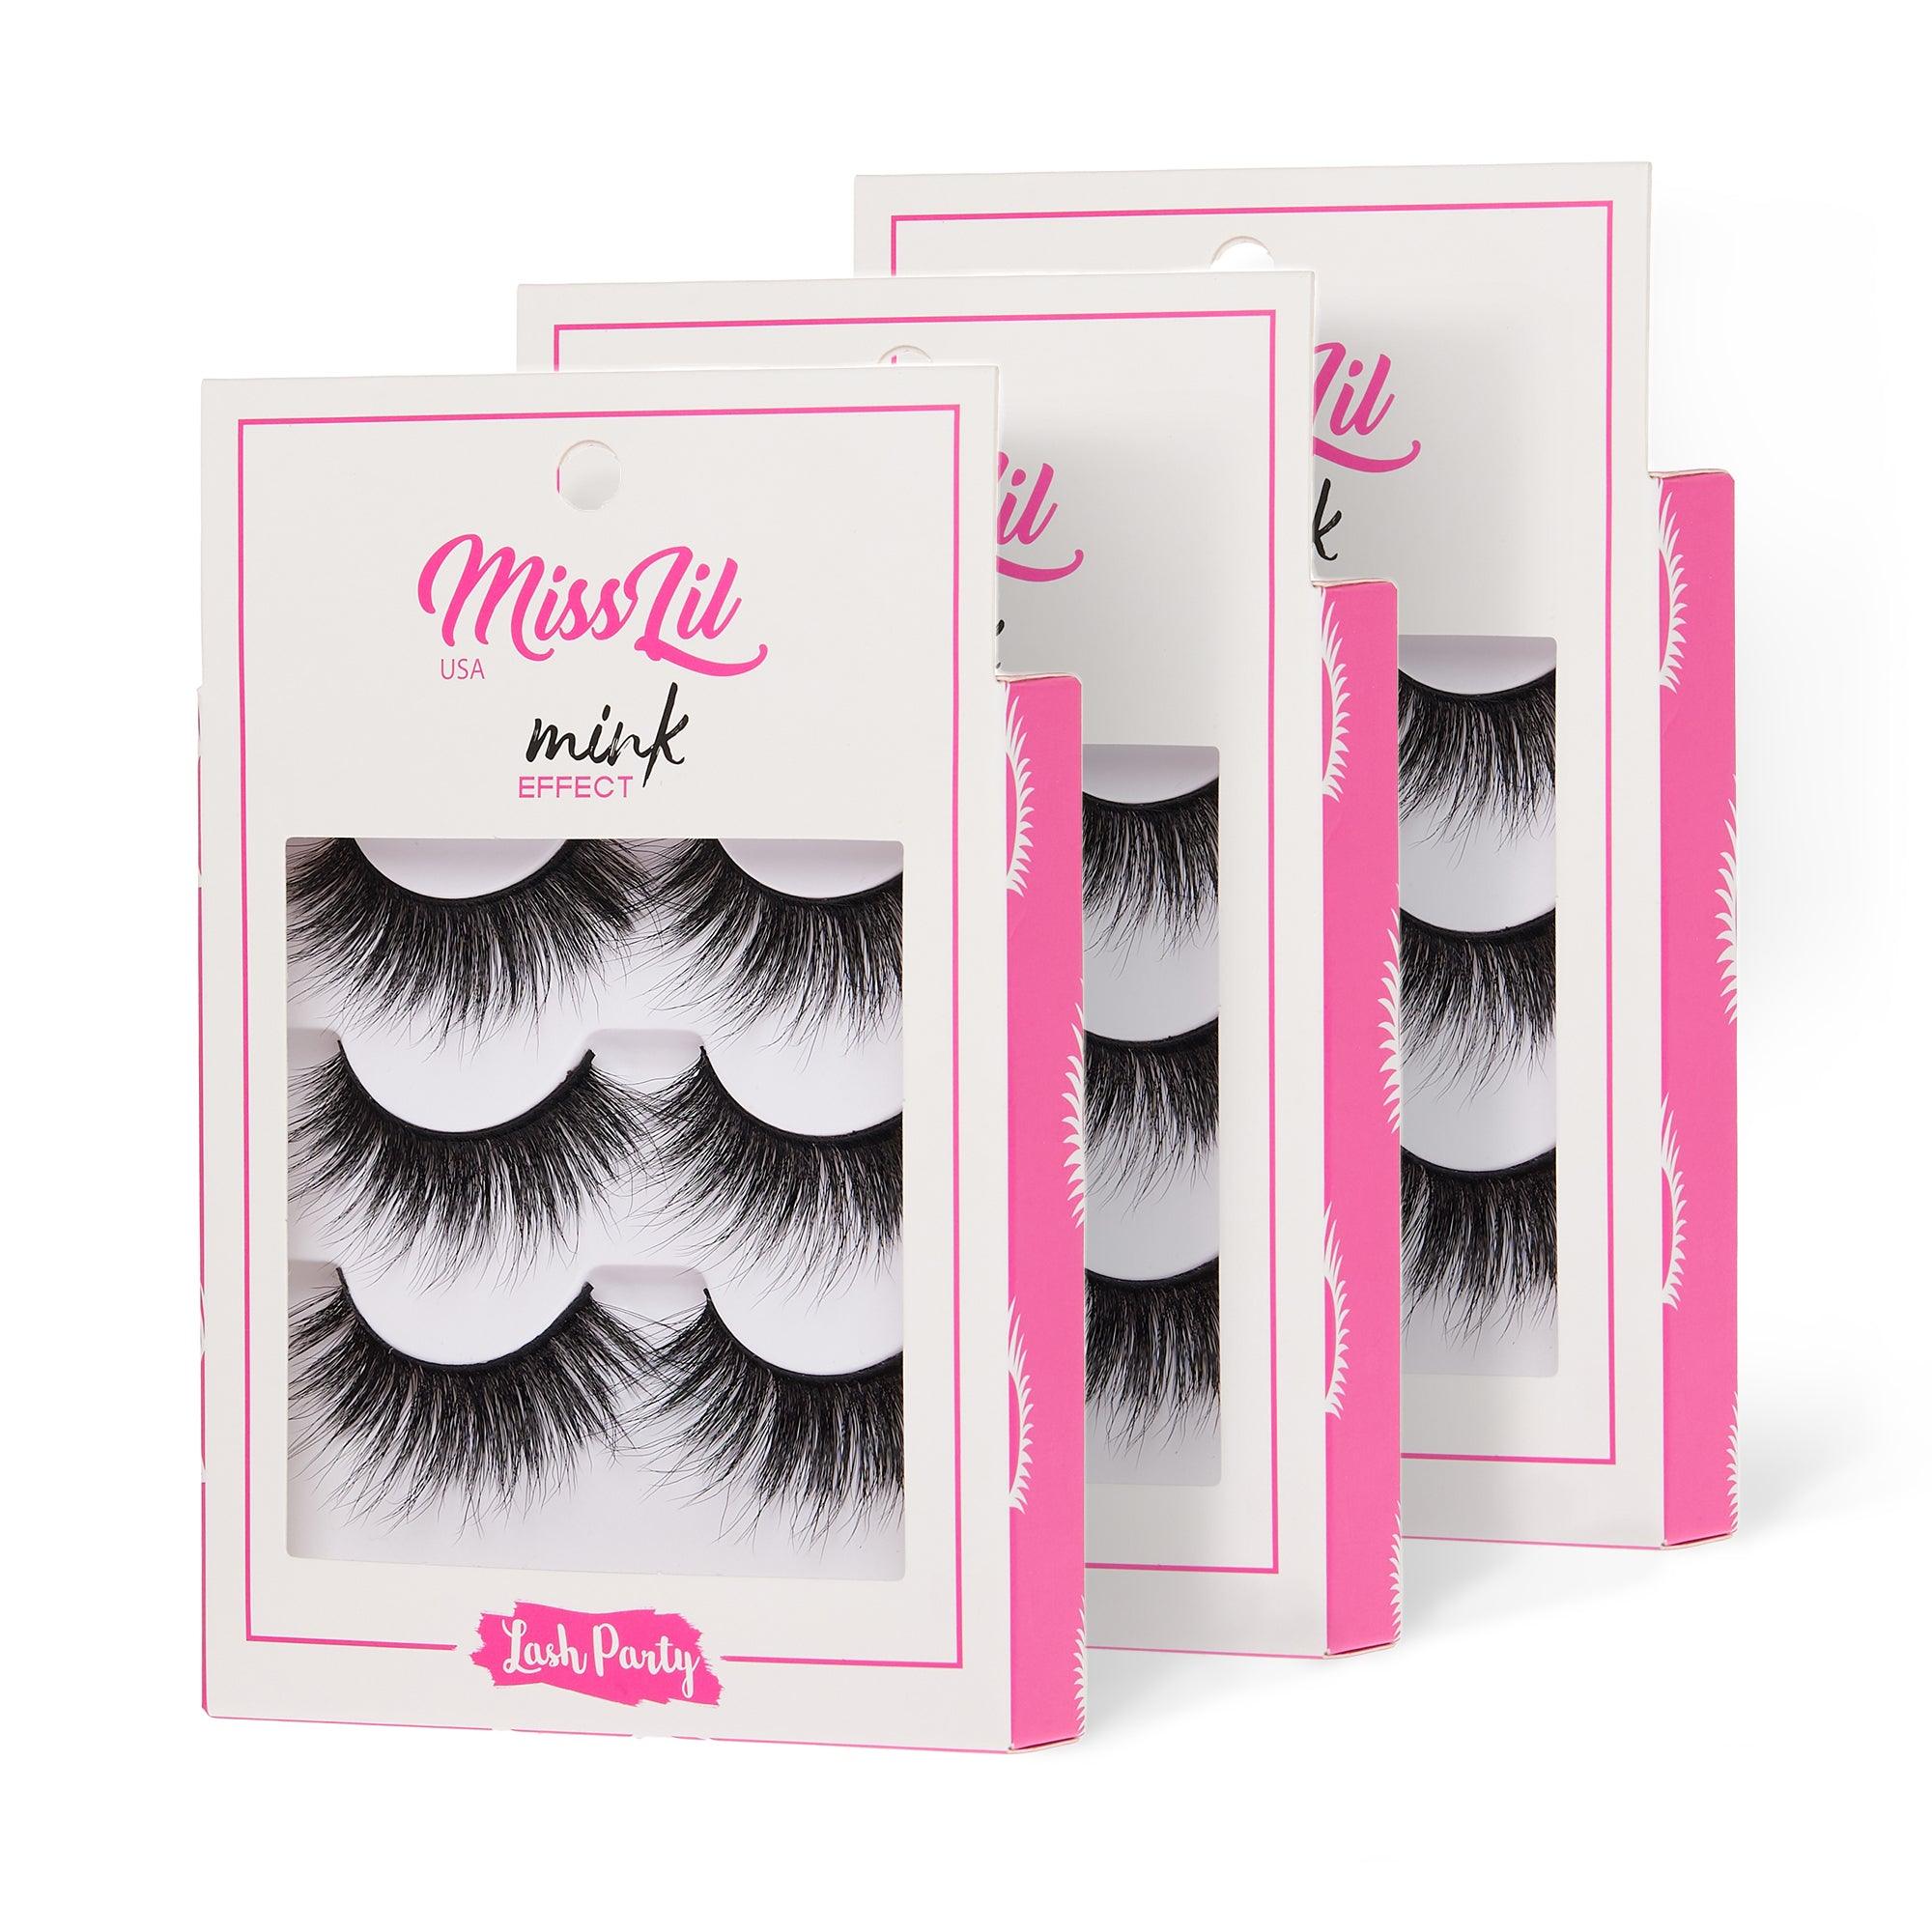 3-Pair Eyelashes - Lash Party Collection #2 ( Pack of 12) - Miss Lil USA Wholesale